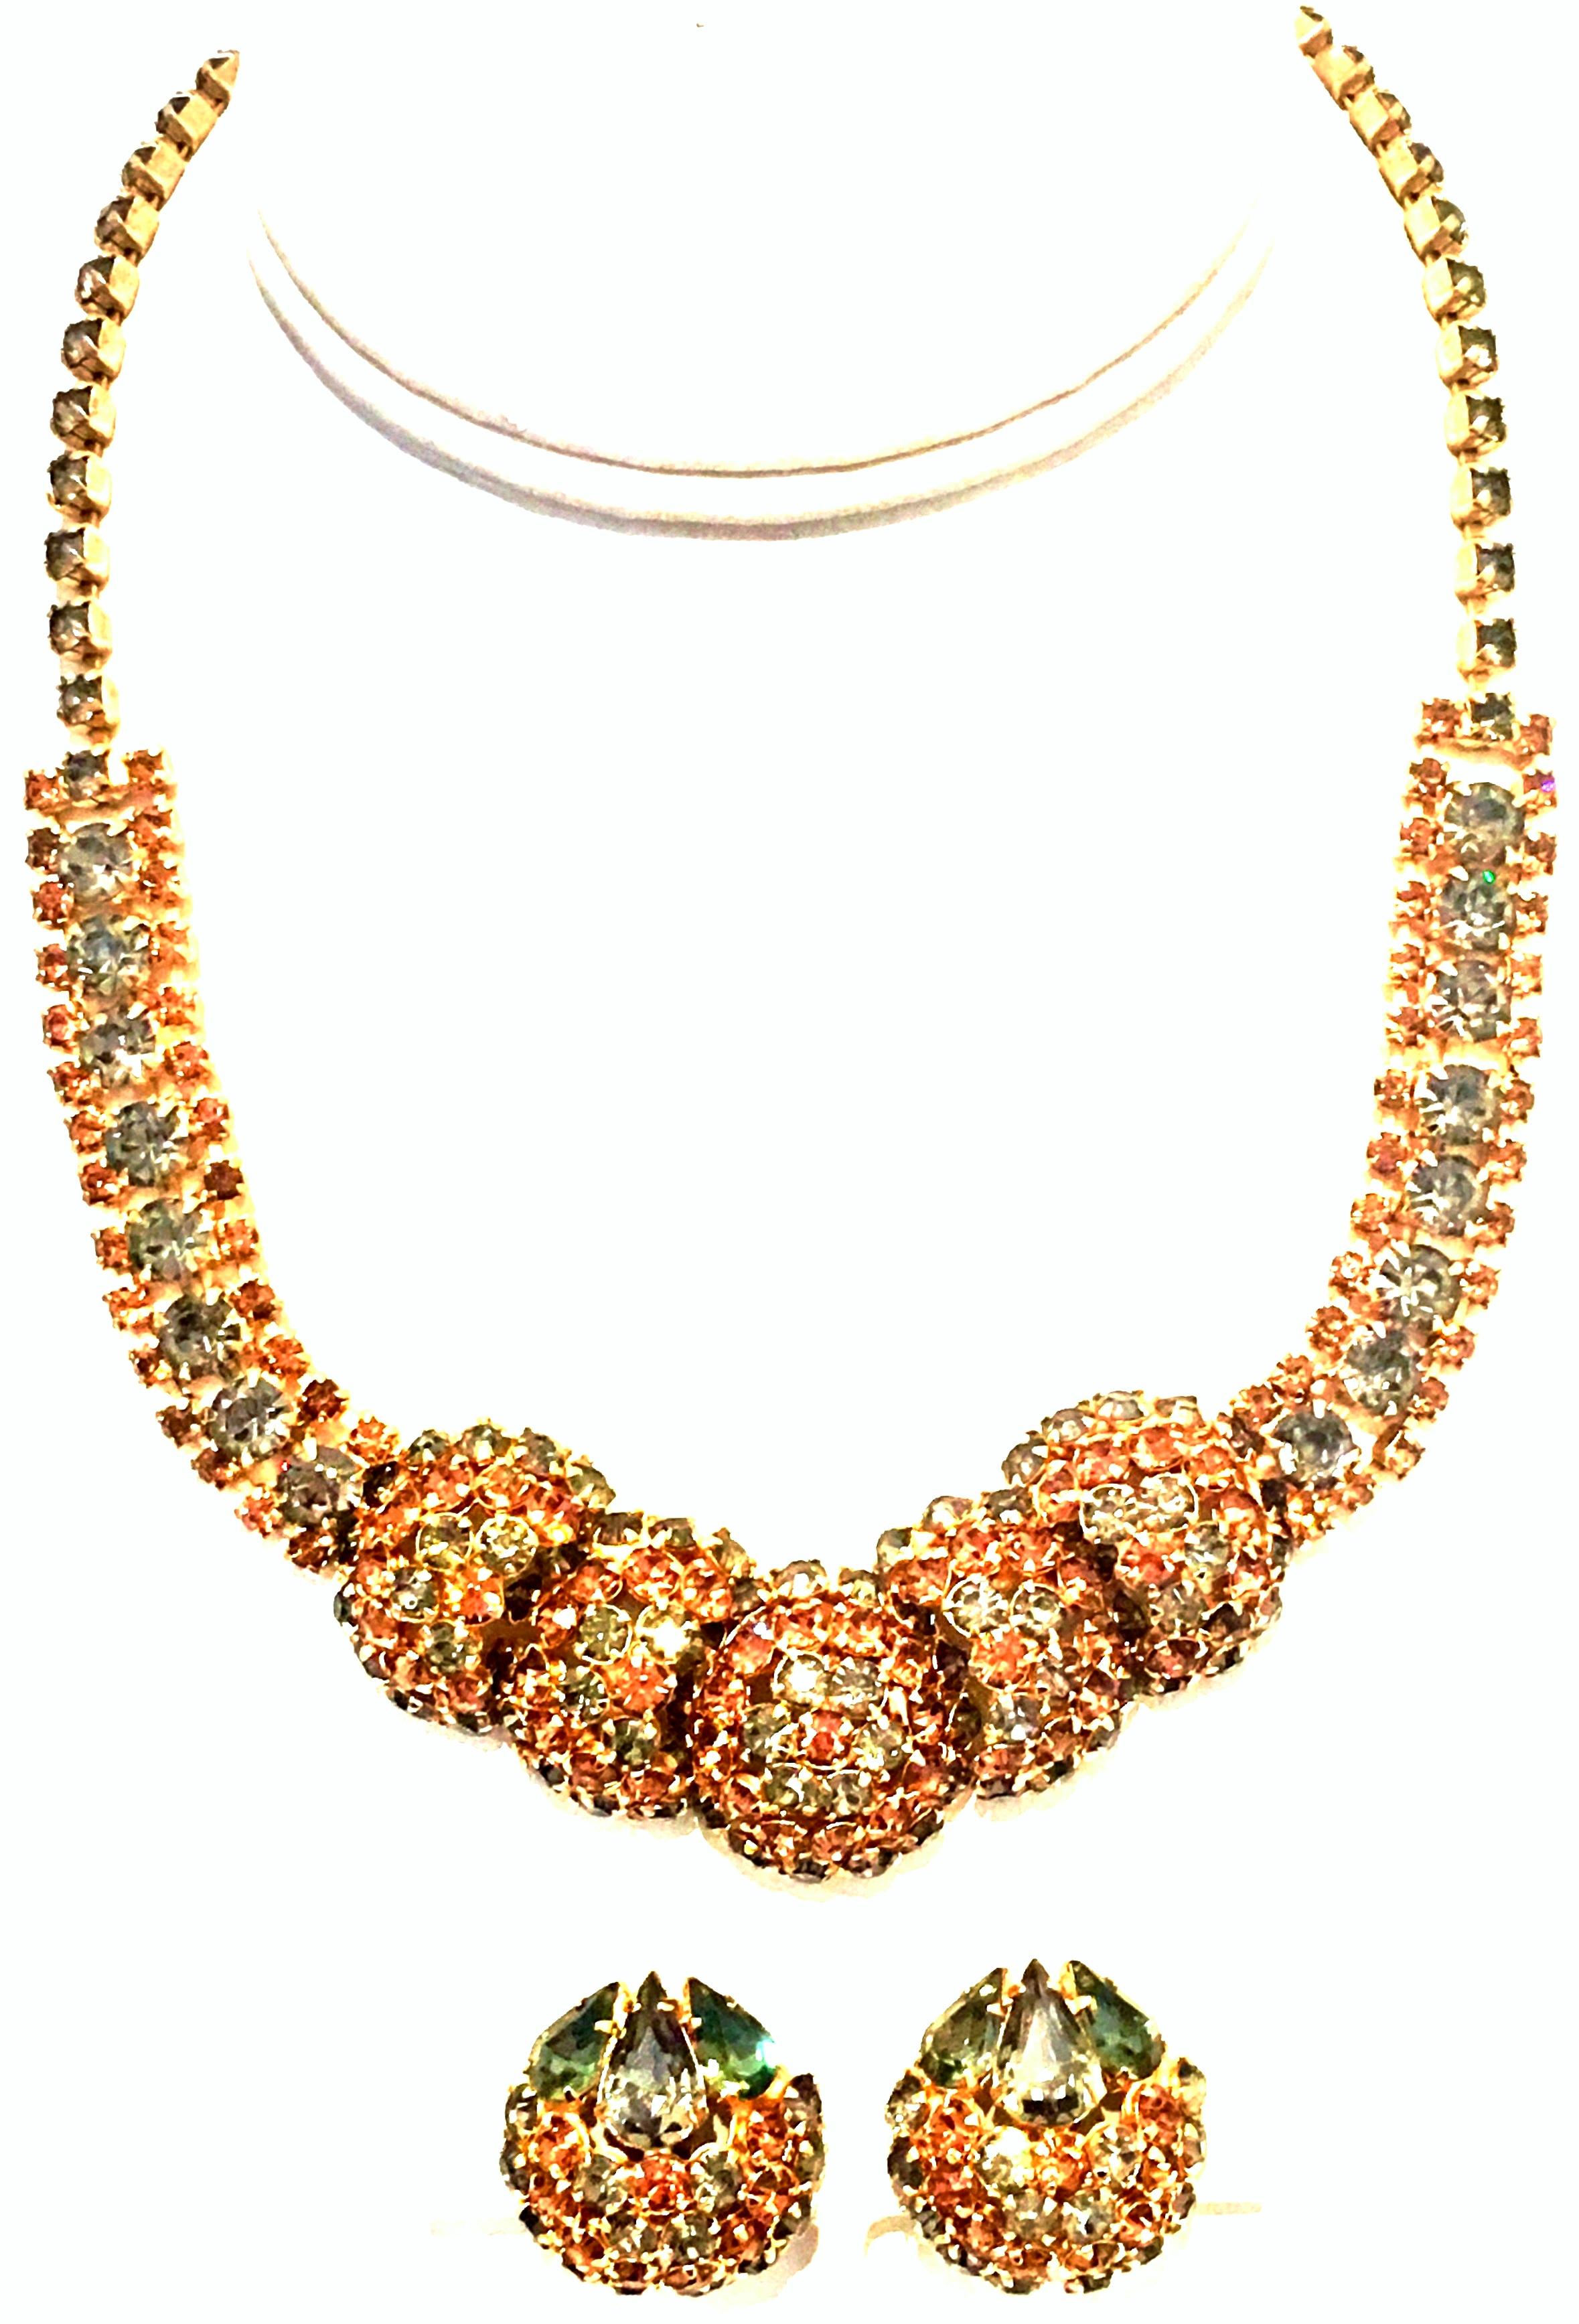 1950'S Gold Plate & Swarovski Crystal Dimensional Choker Style Necklace and clip earrings by,
Joseph Warner-Set of Three Pieces. This rare and coveted three piece 